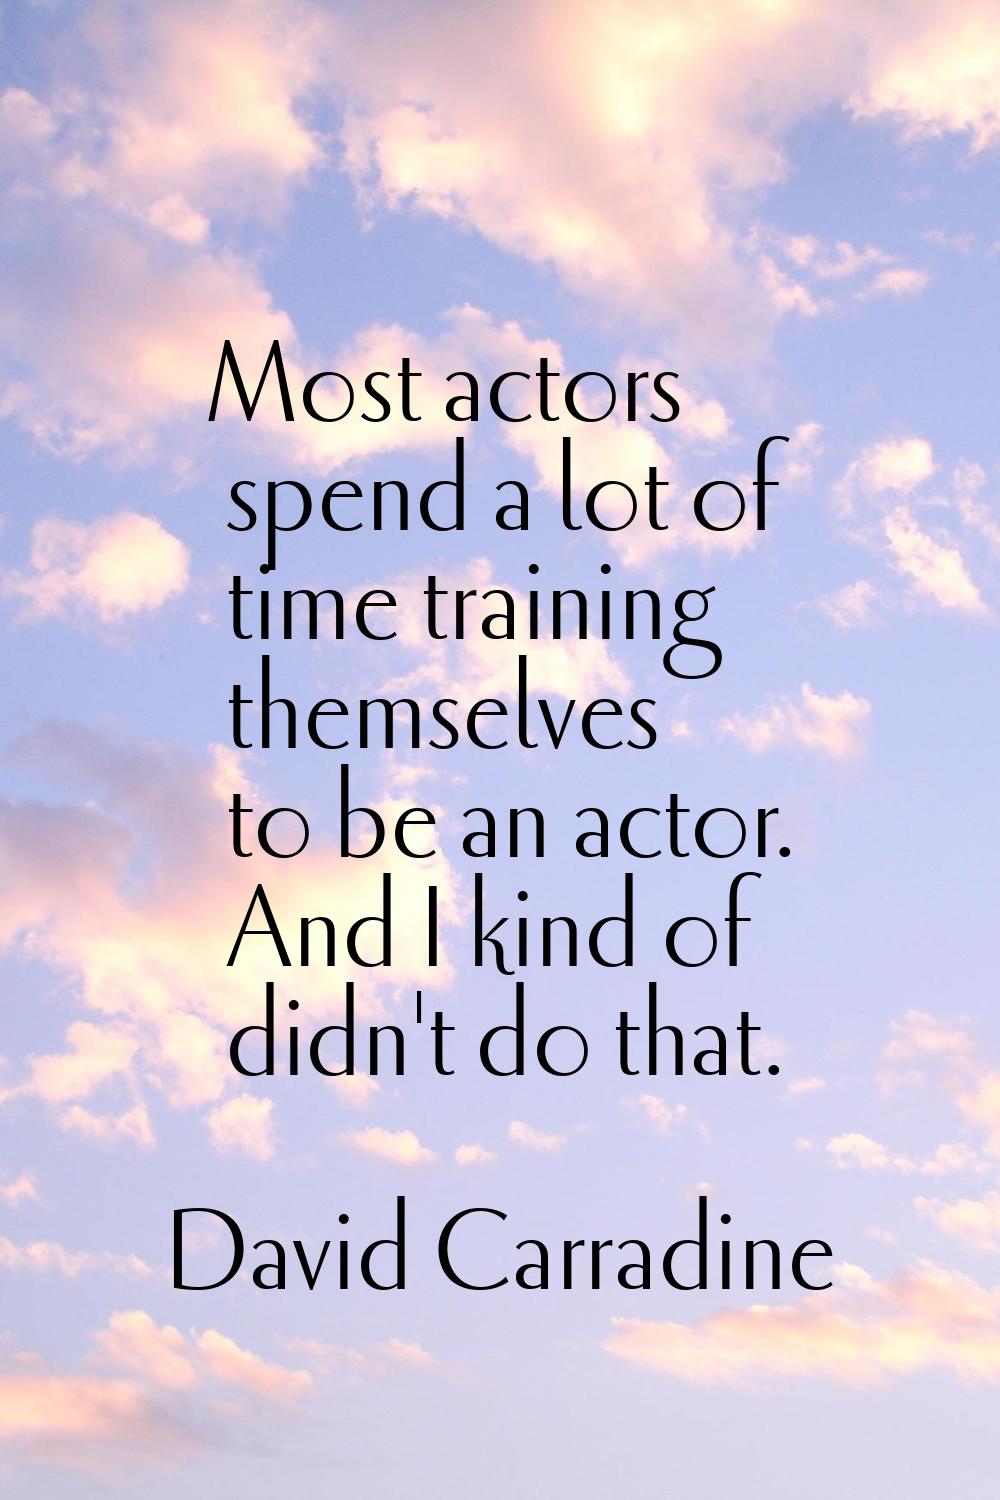 Most actors spend a lot of time training themselves to be an actor. And I kind of didn't do that.